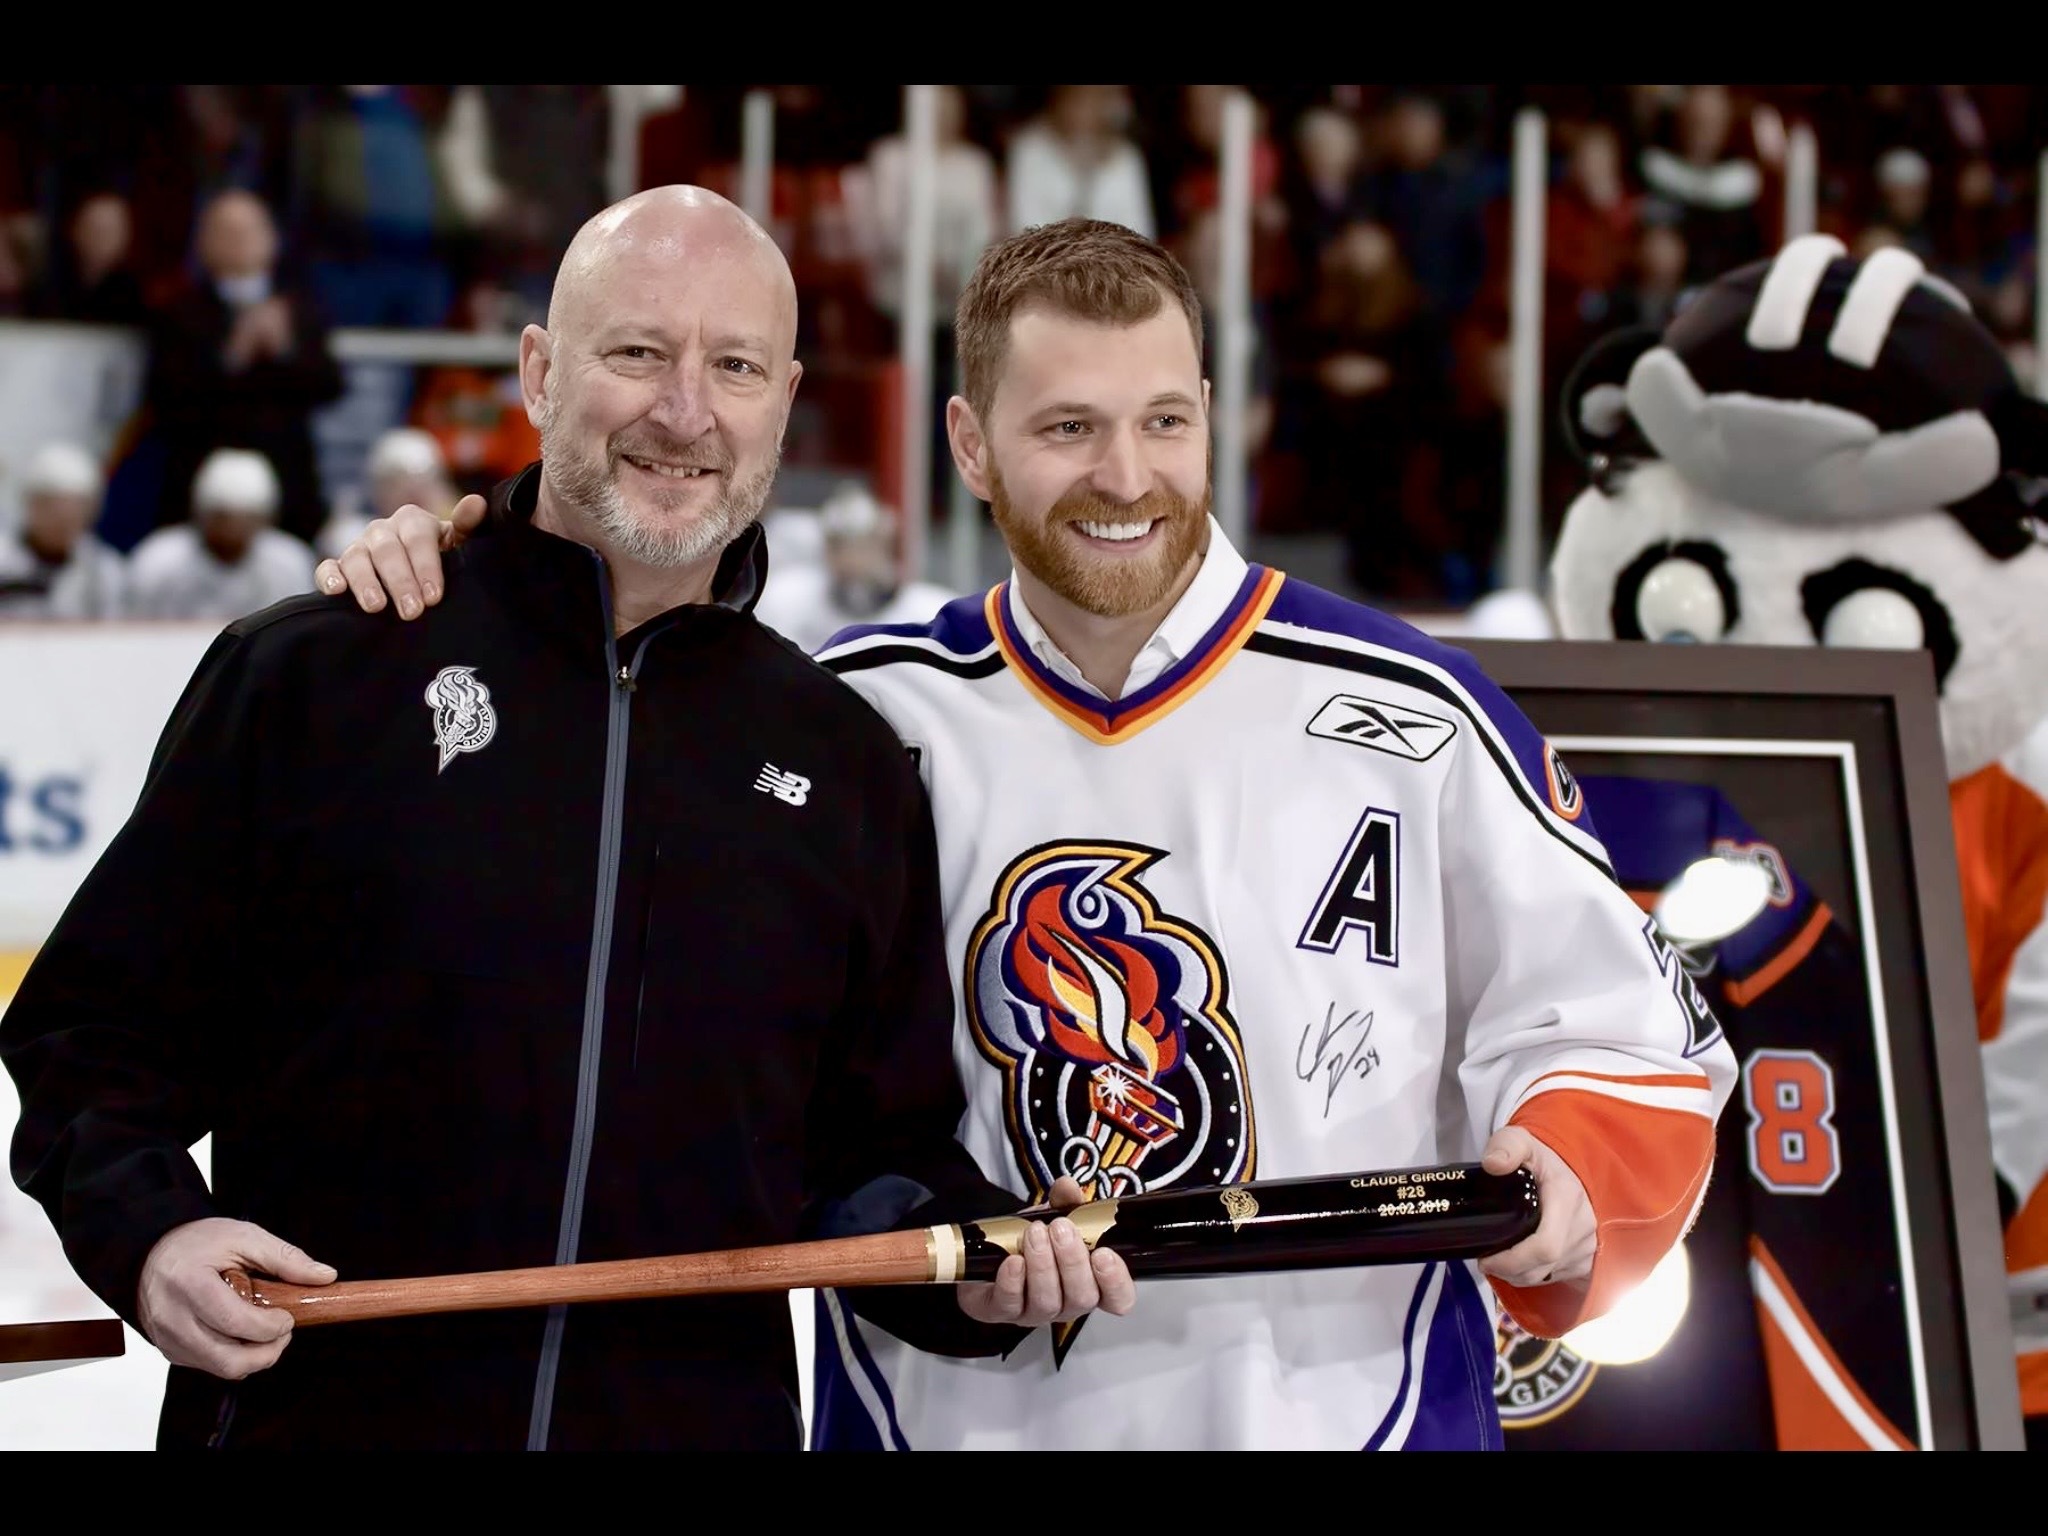 Claude Giroux - Hockey, Family and Coming Home